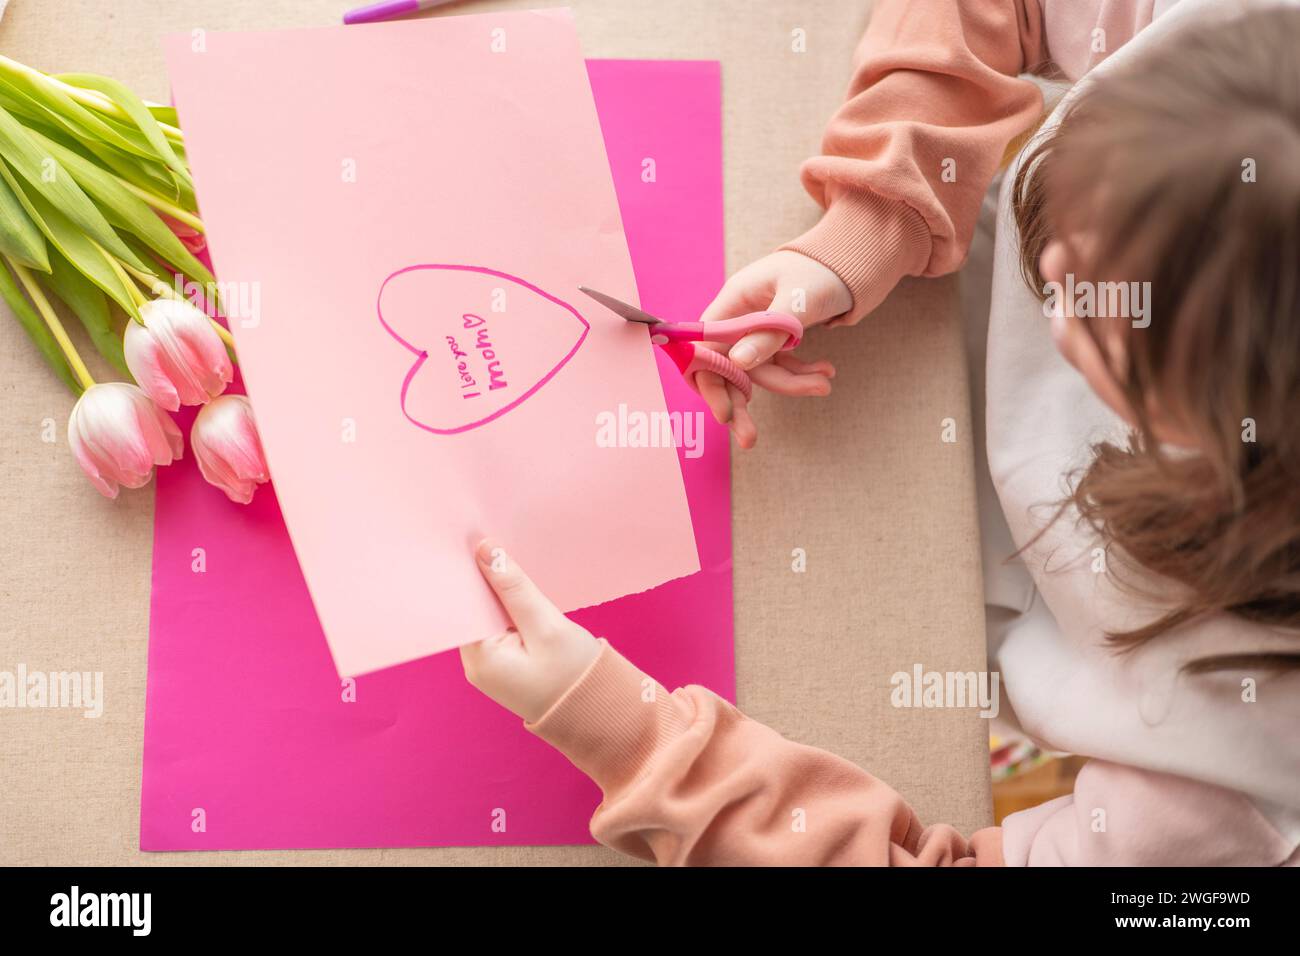 Mothers Day.moms day concept. DIY mom card.Child cuts a heart out of paper at the table. child makes a card for his mother.Flowers and cards for mom. Stock Photo